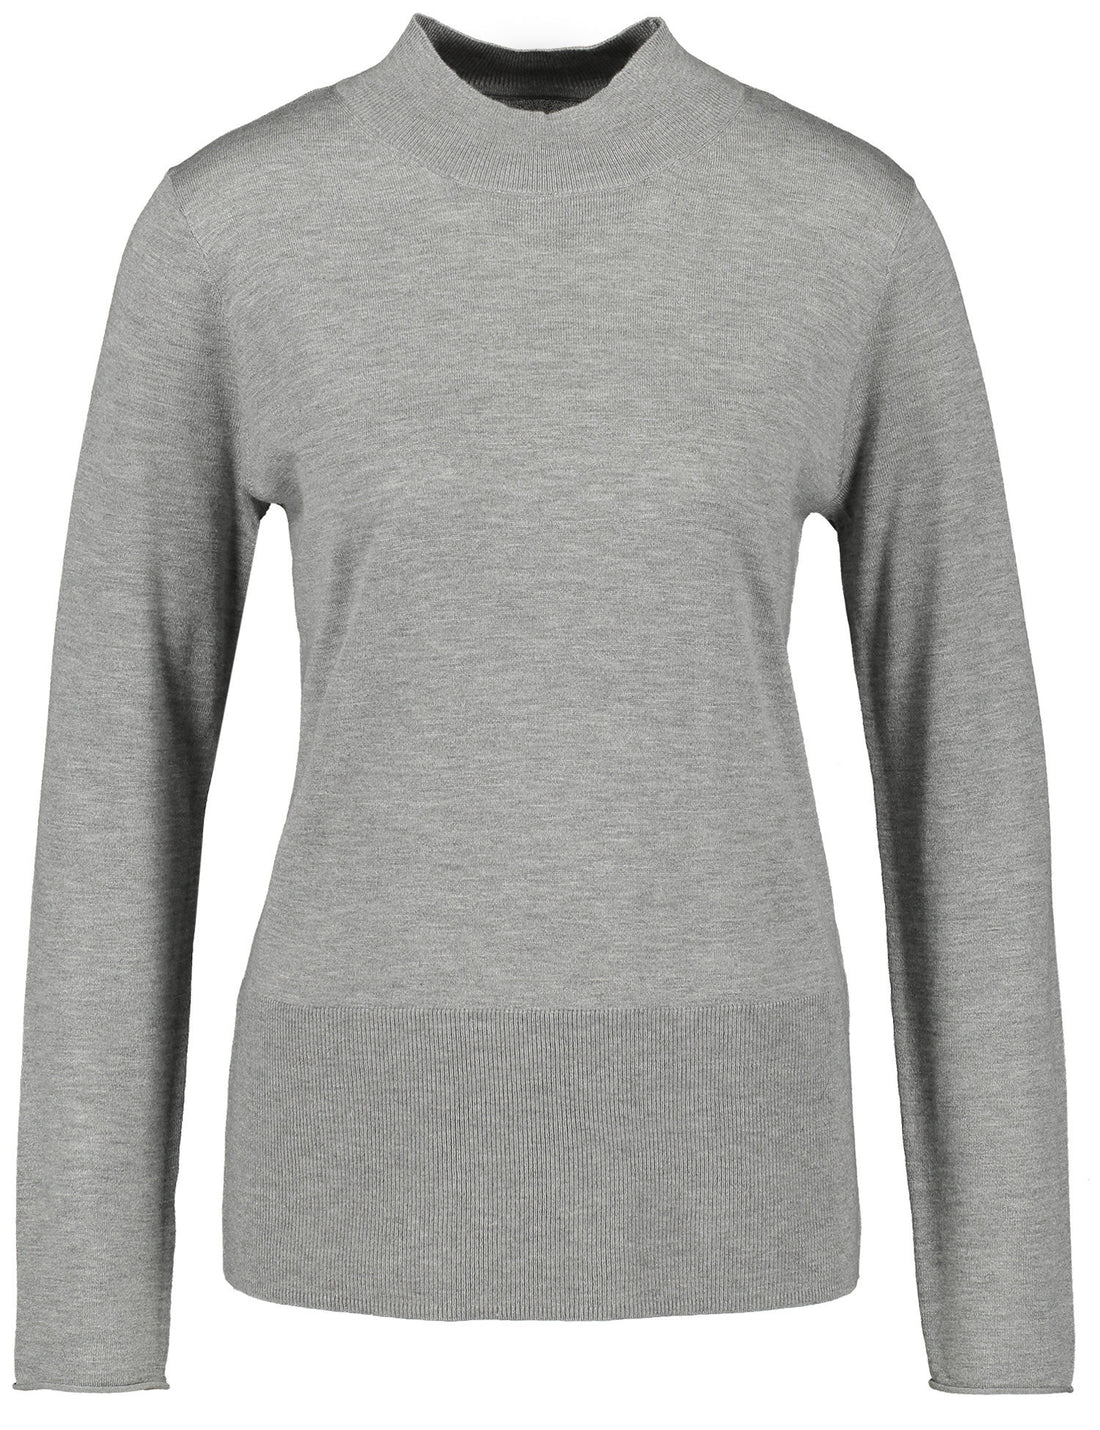 Grey Knitted Pullover With Mock Neck_170530-44705_204690_01